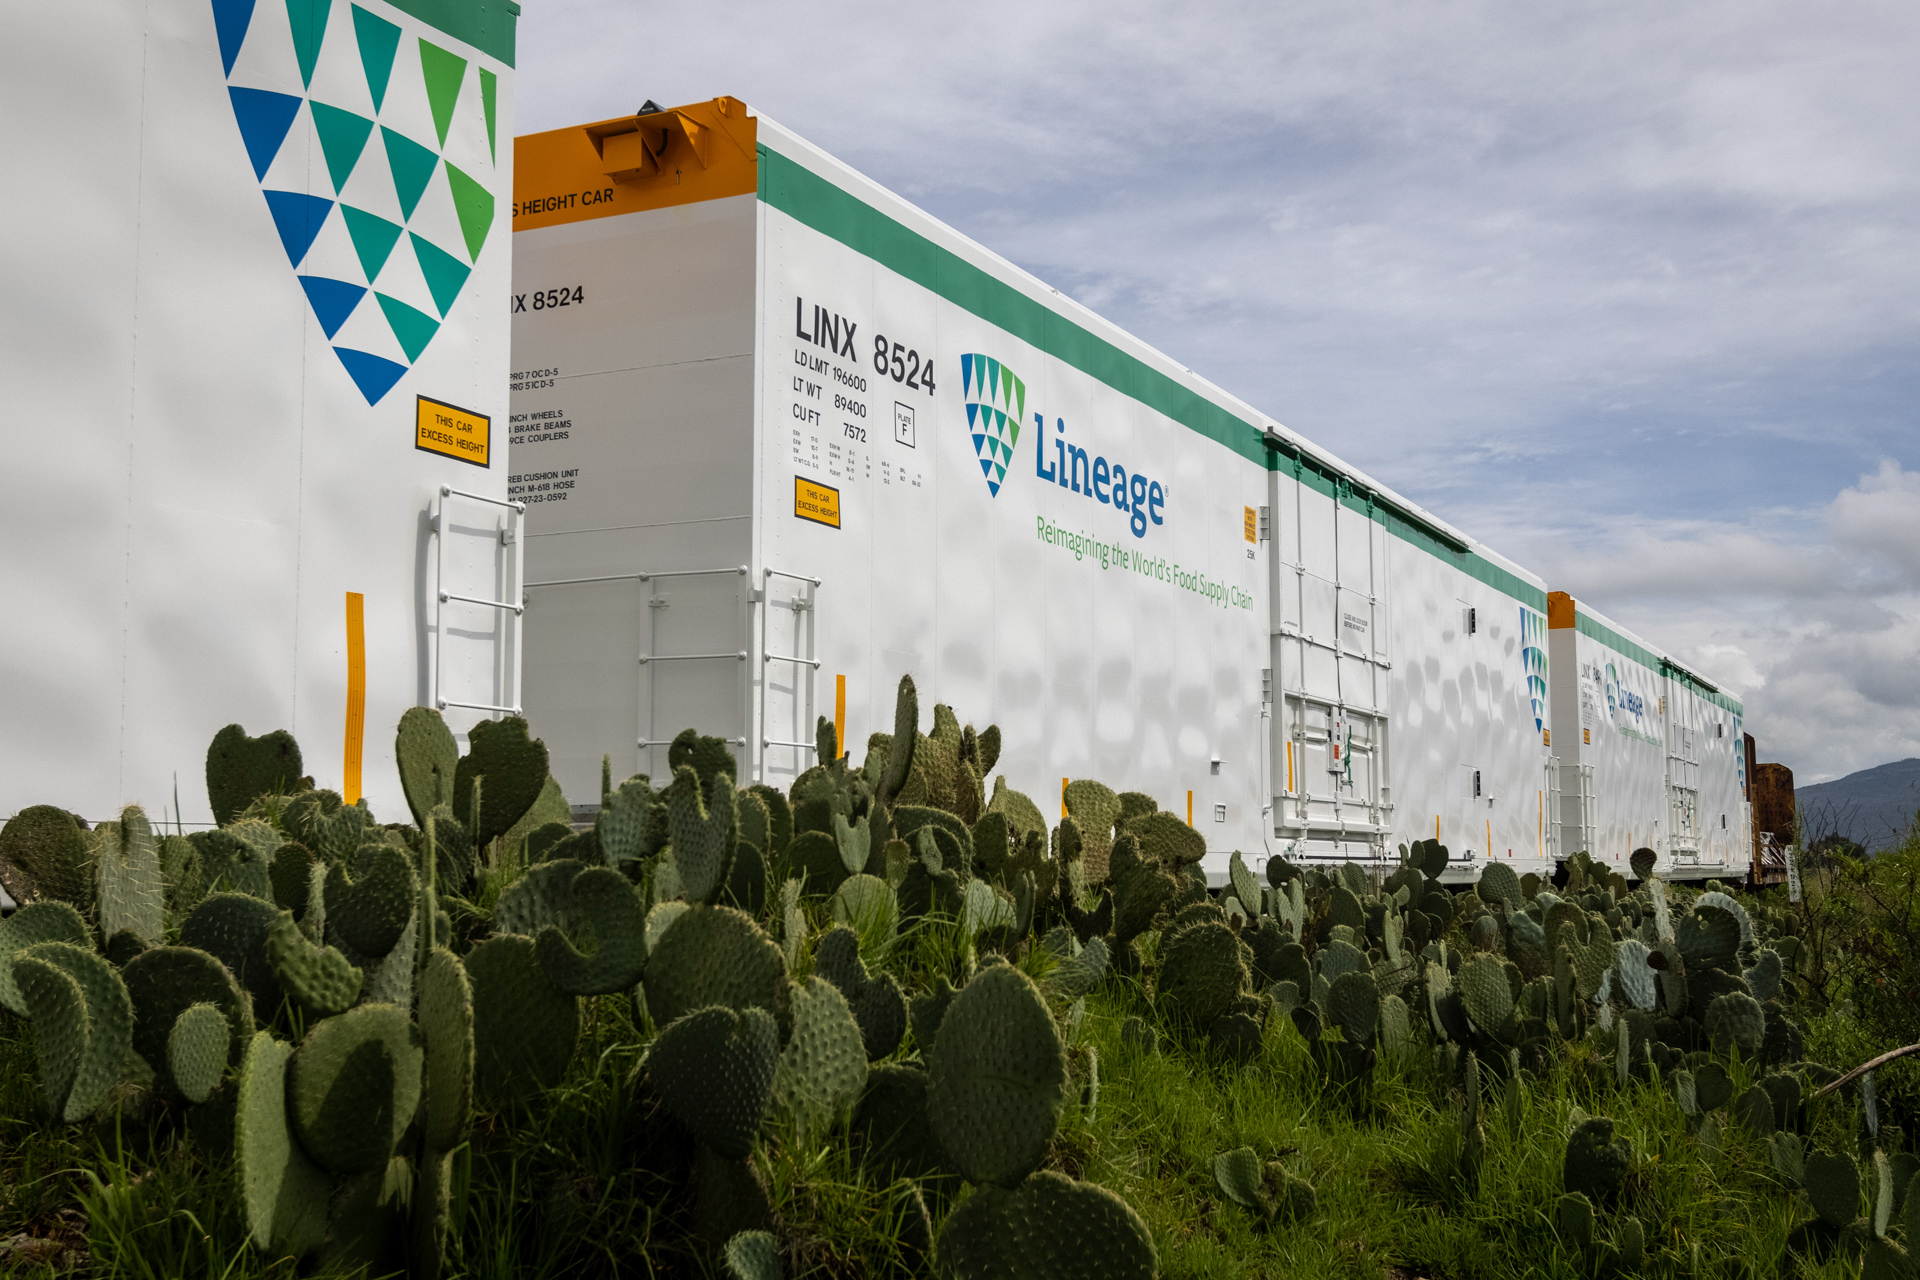 Lineage trains behind cactus